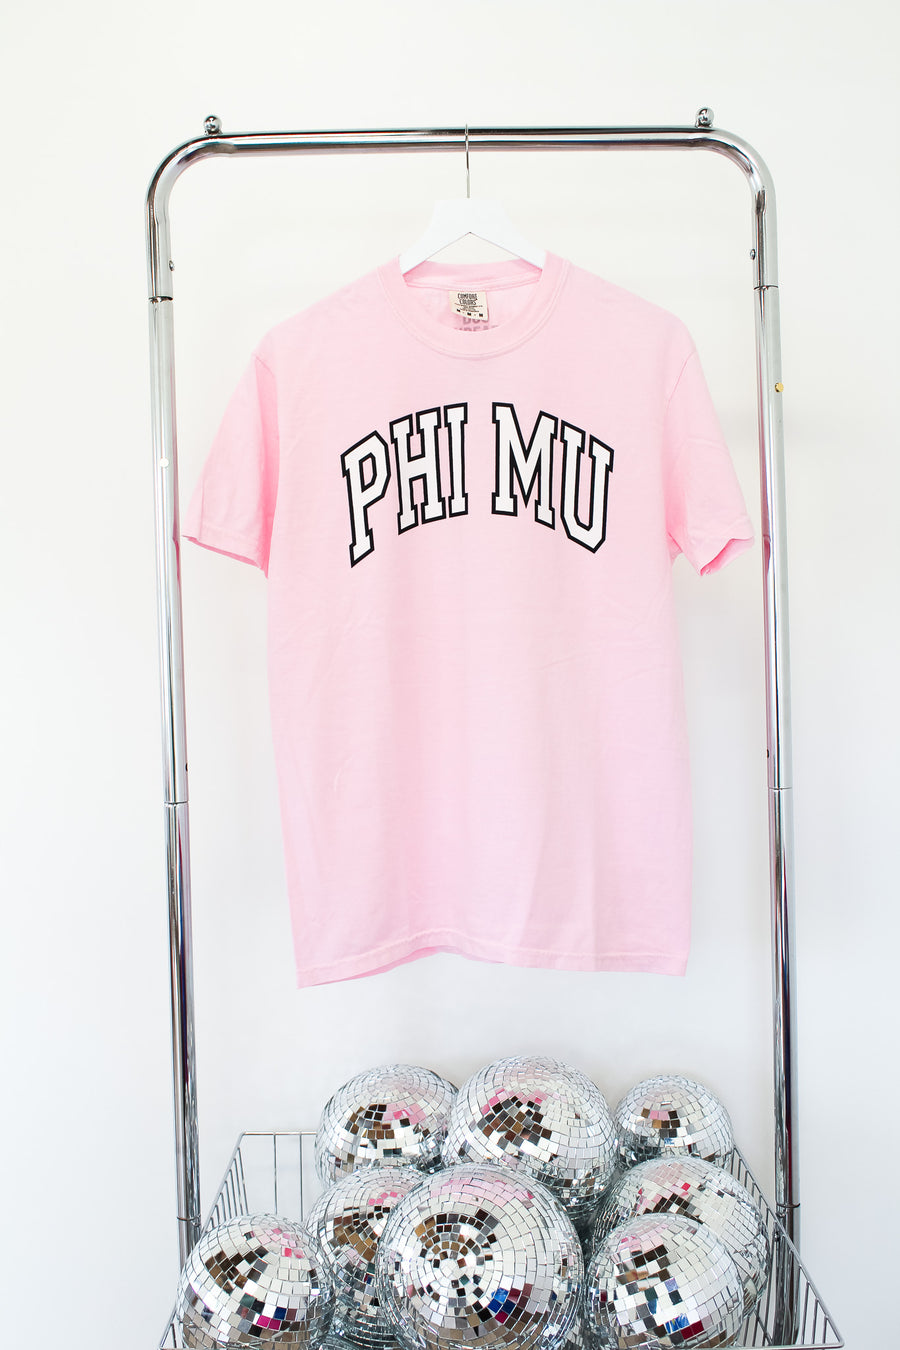 Phi Mu Spellout Tee - MD COTTON CANDY